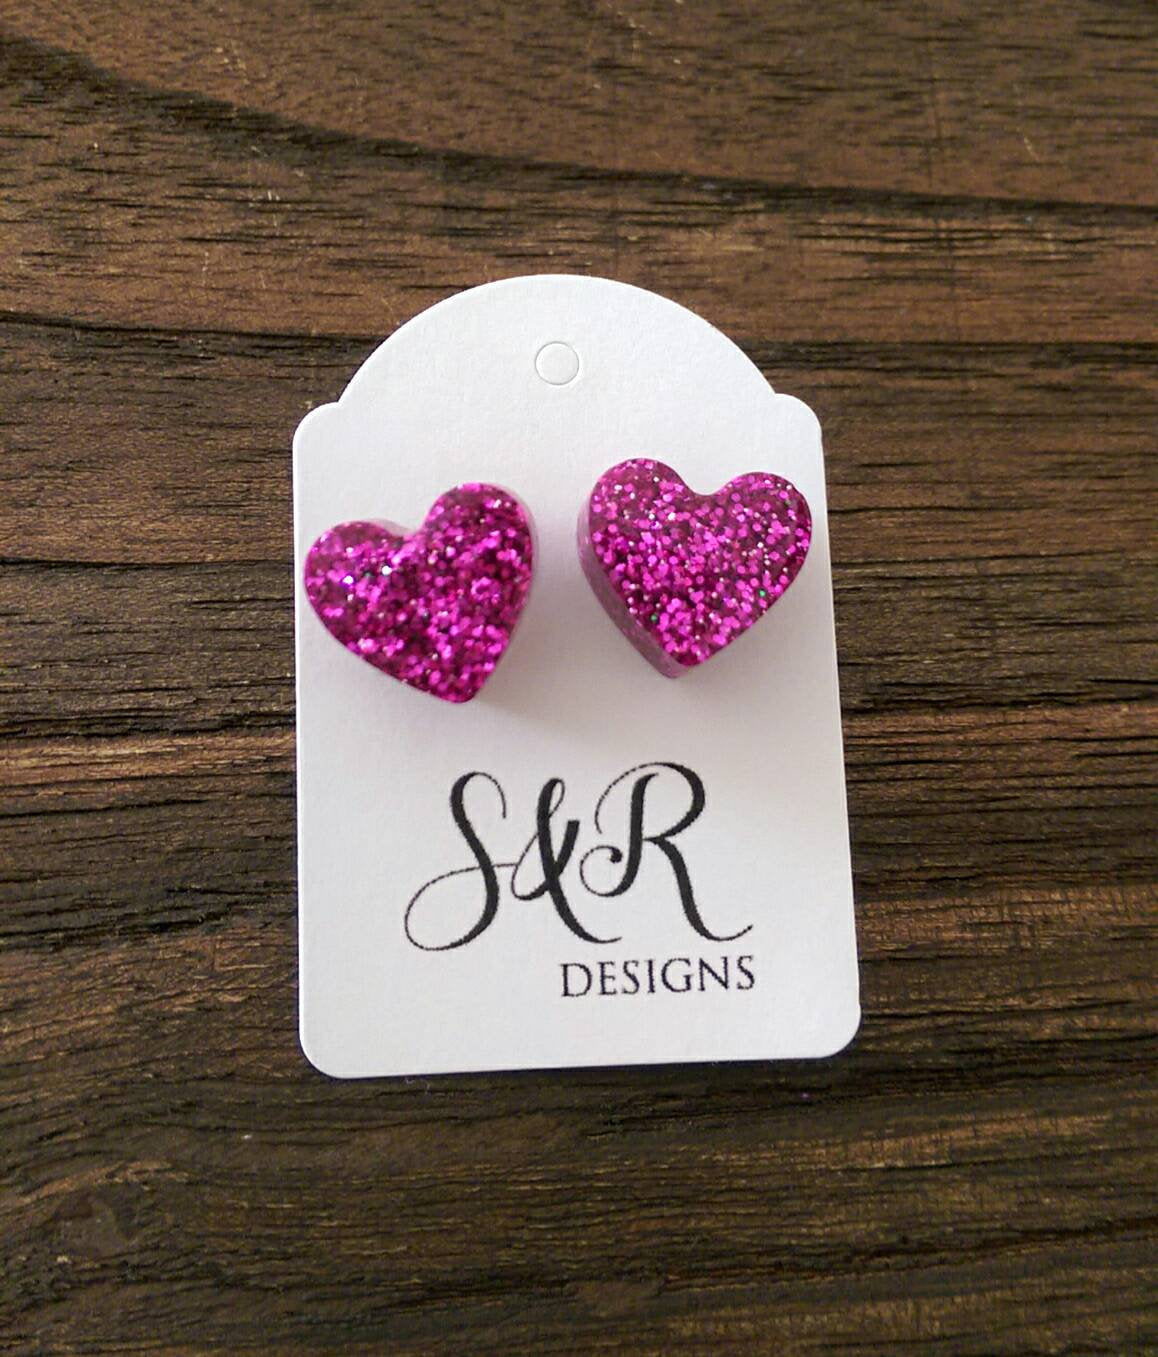 Sparkly Glitter Heart Resin Stud Earrings made of Stainless Steel. Choose colour.